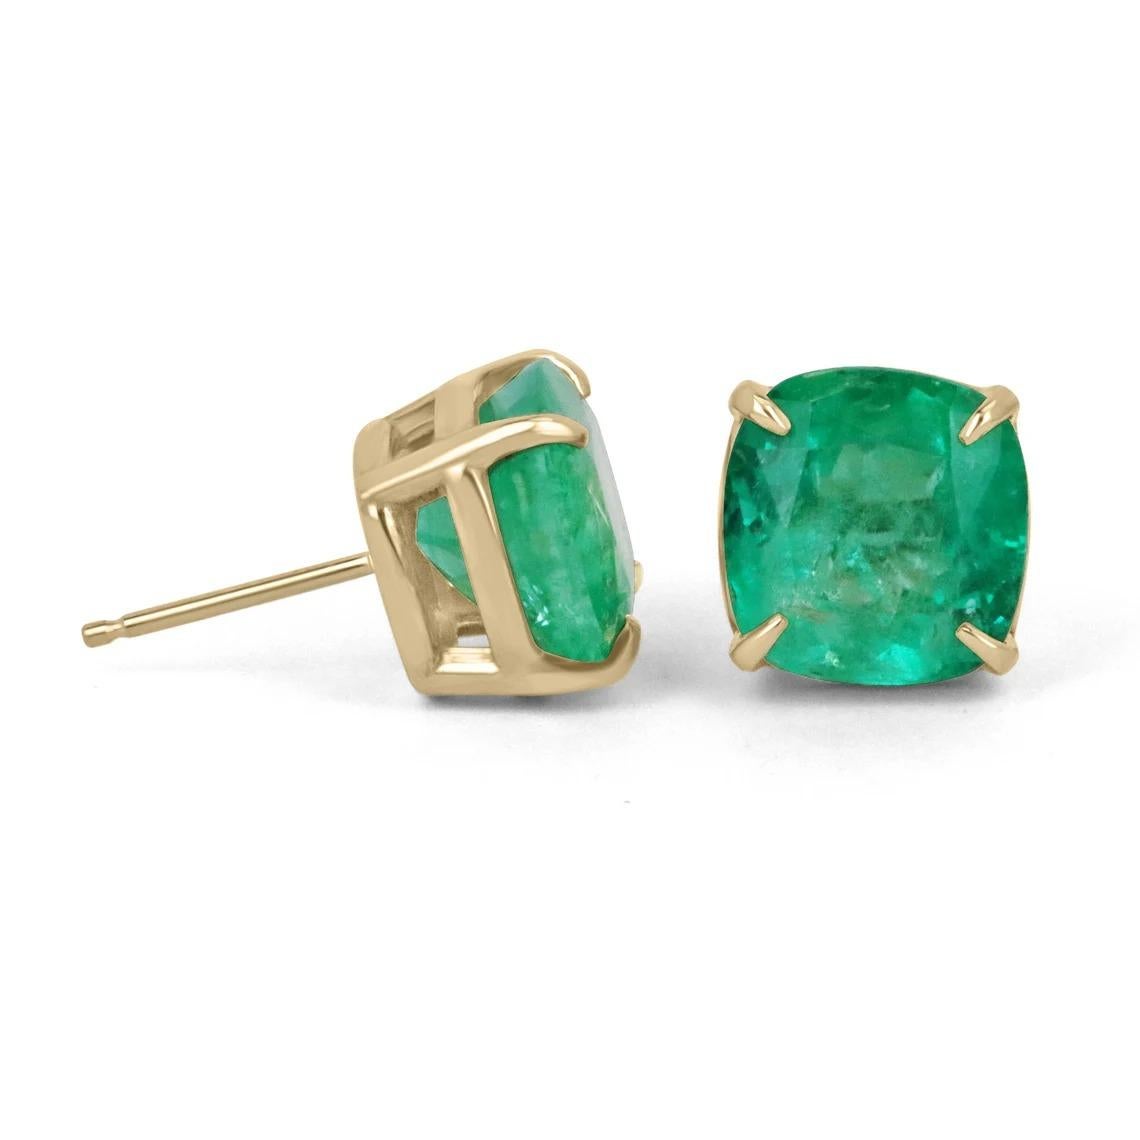 Featured here is a stunning pair set of cushion-cut emerald studs, skillfully handmade in fine solid 18K yellow gold. Displayed are two large spectacular natural Colombian emeralds with good transparency, color and luster accented by a secure